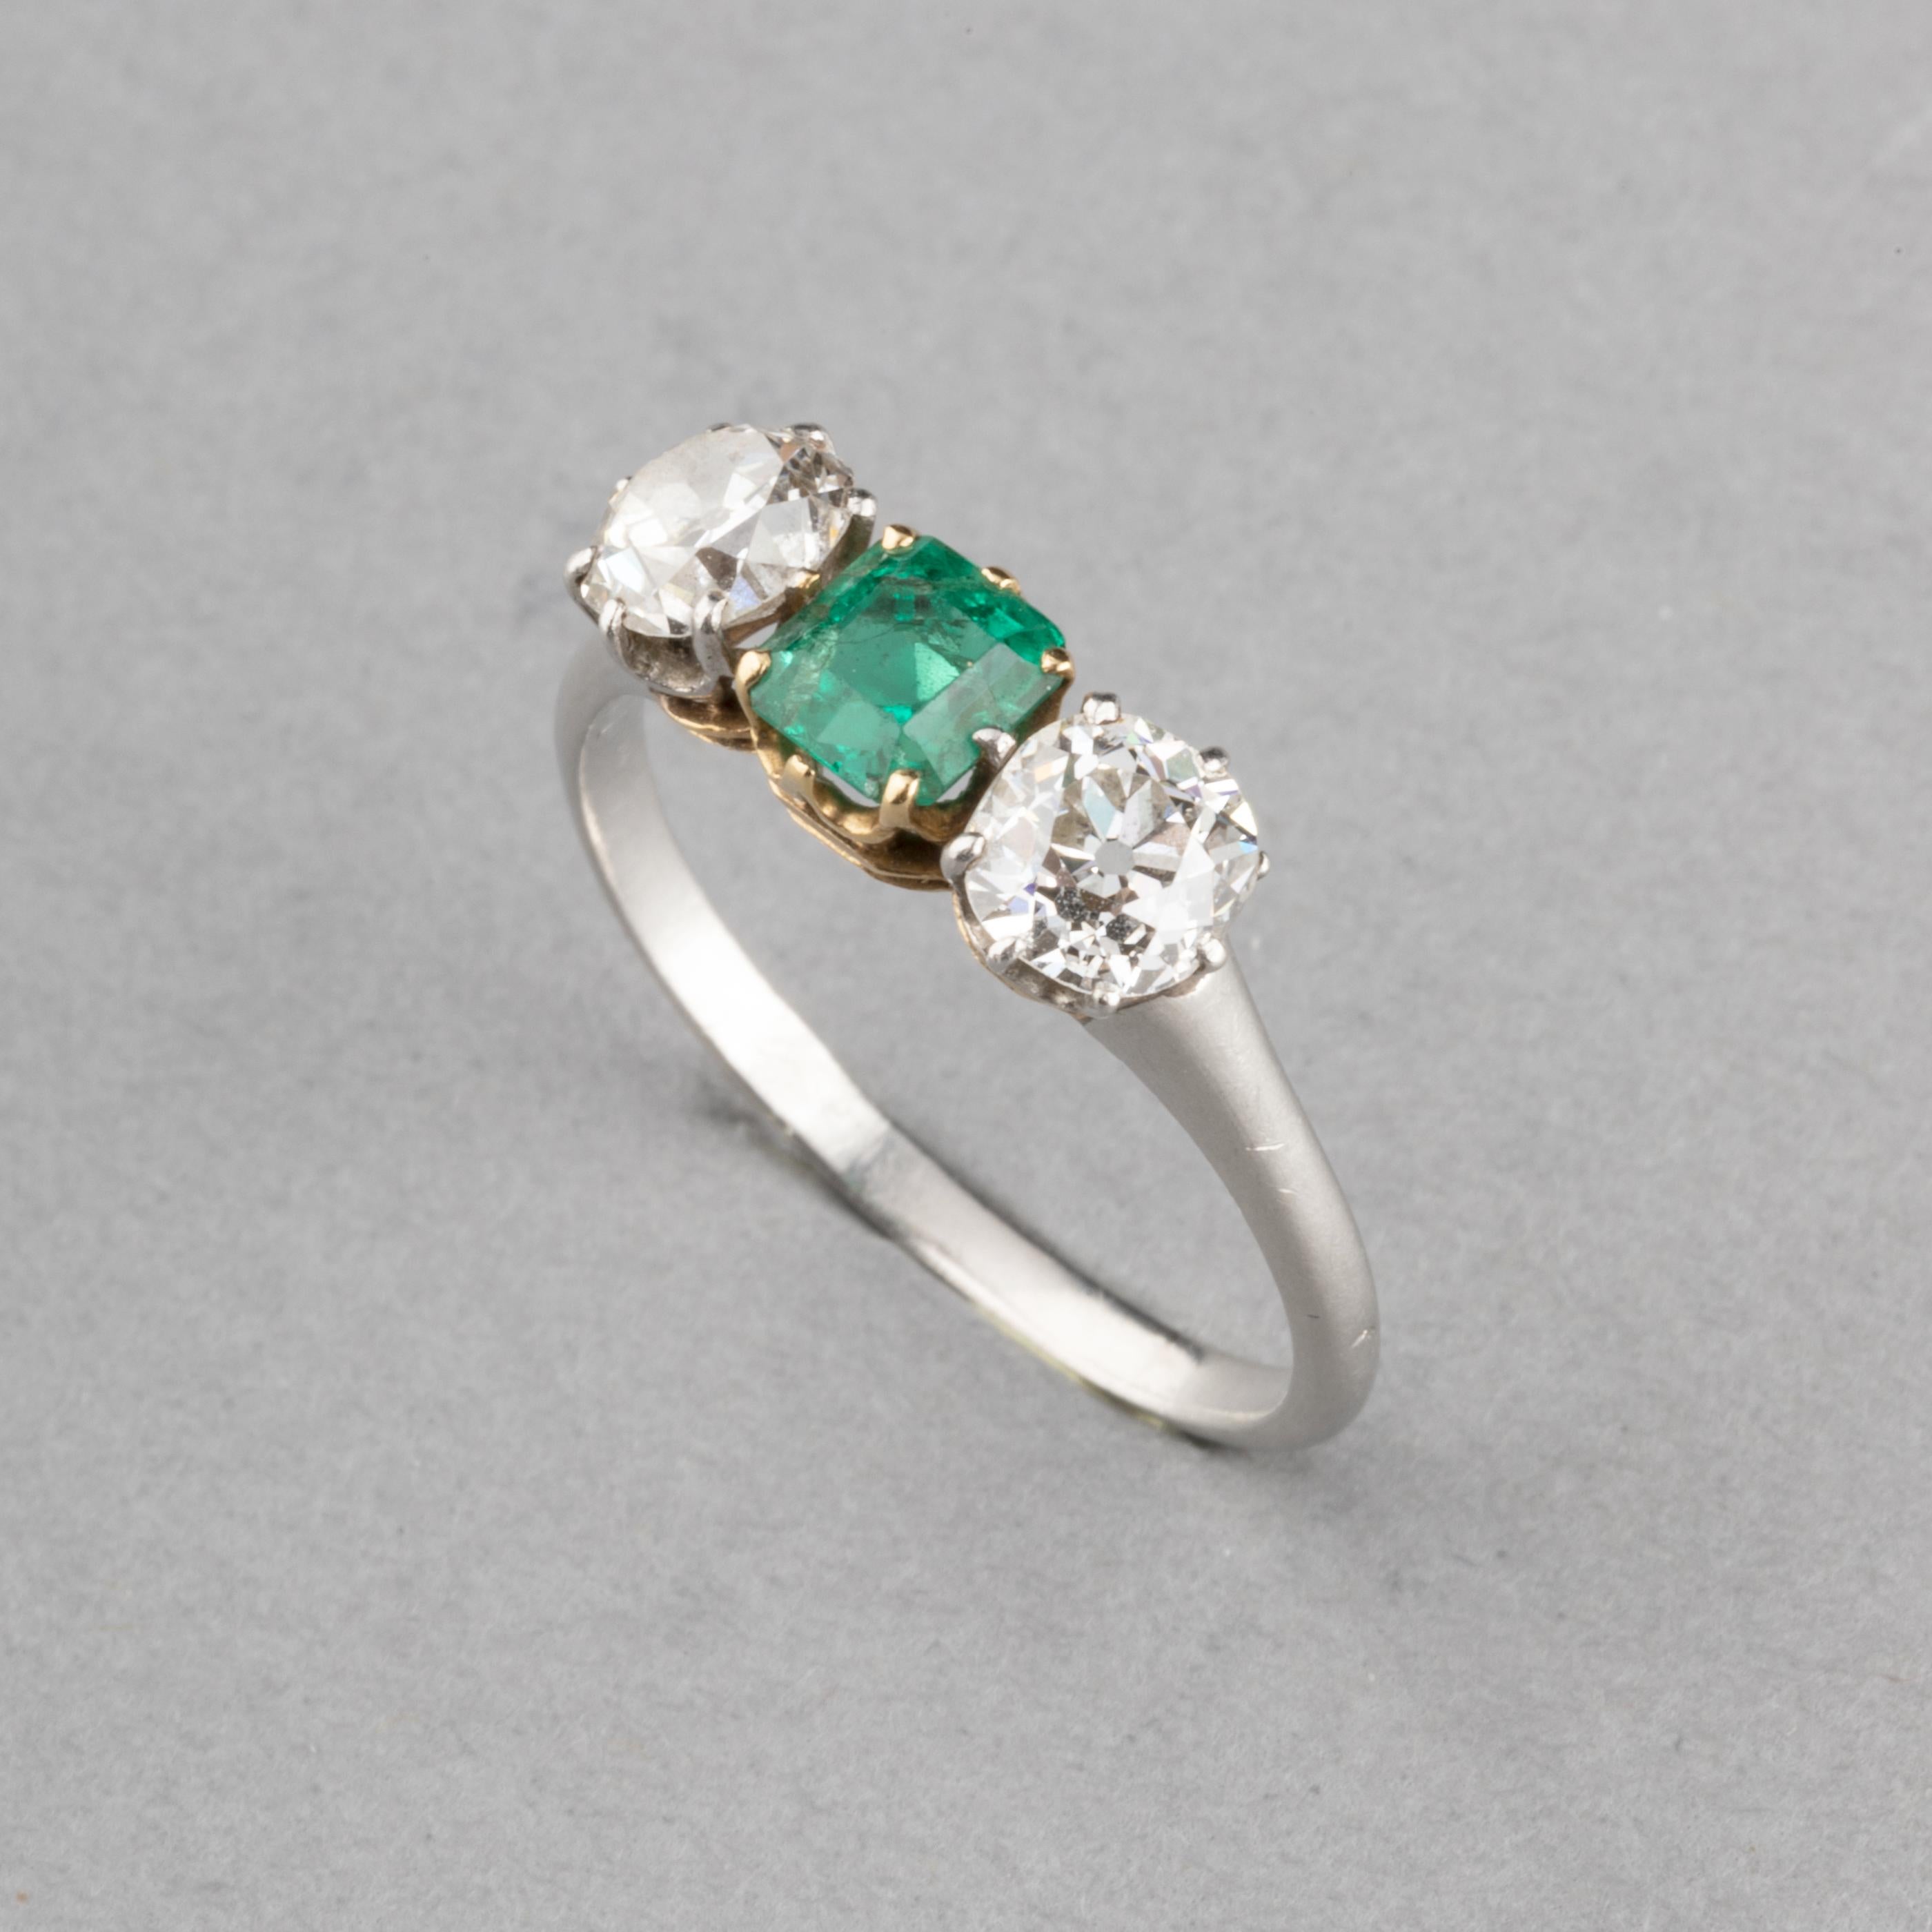 Platinum Diamonds and Emerald French Antique Ring

Beautiful antique ring, made in France circa 1920.
Made in Platinum (dog head mark) and 18k gold. Mark of the maker (unknown).
Set with two quality round old European cut diamonds.They 0.45 carats